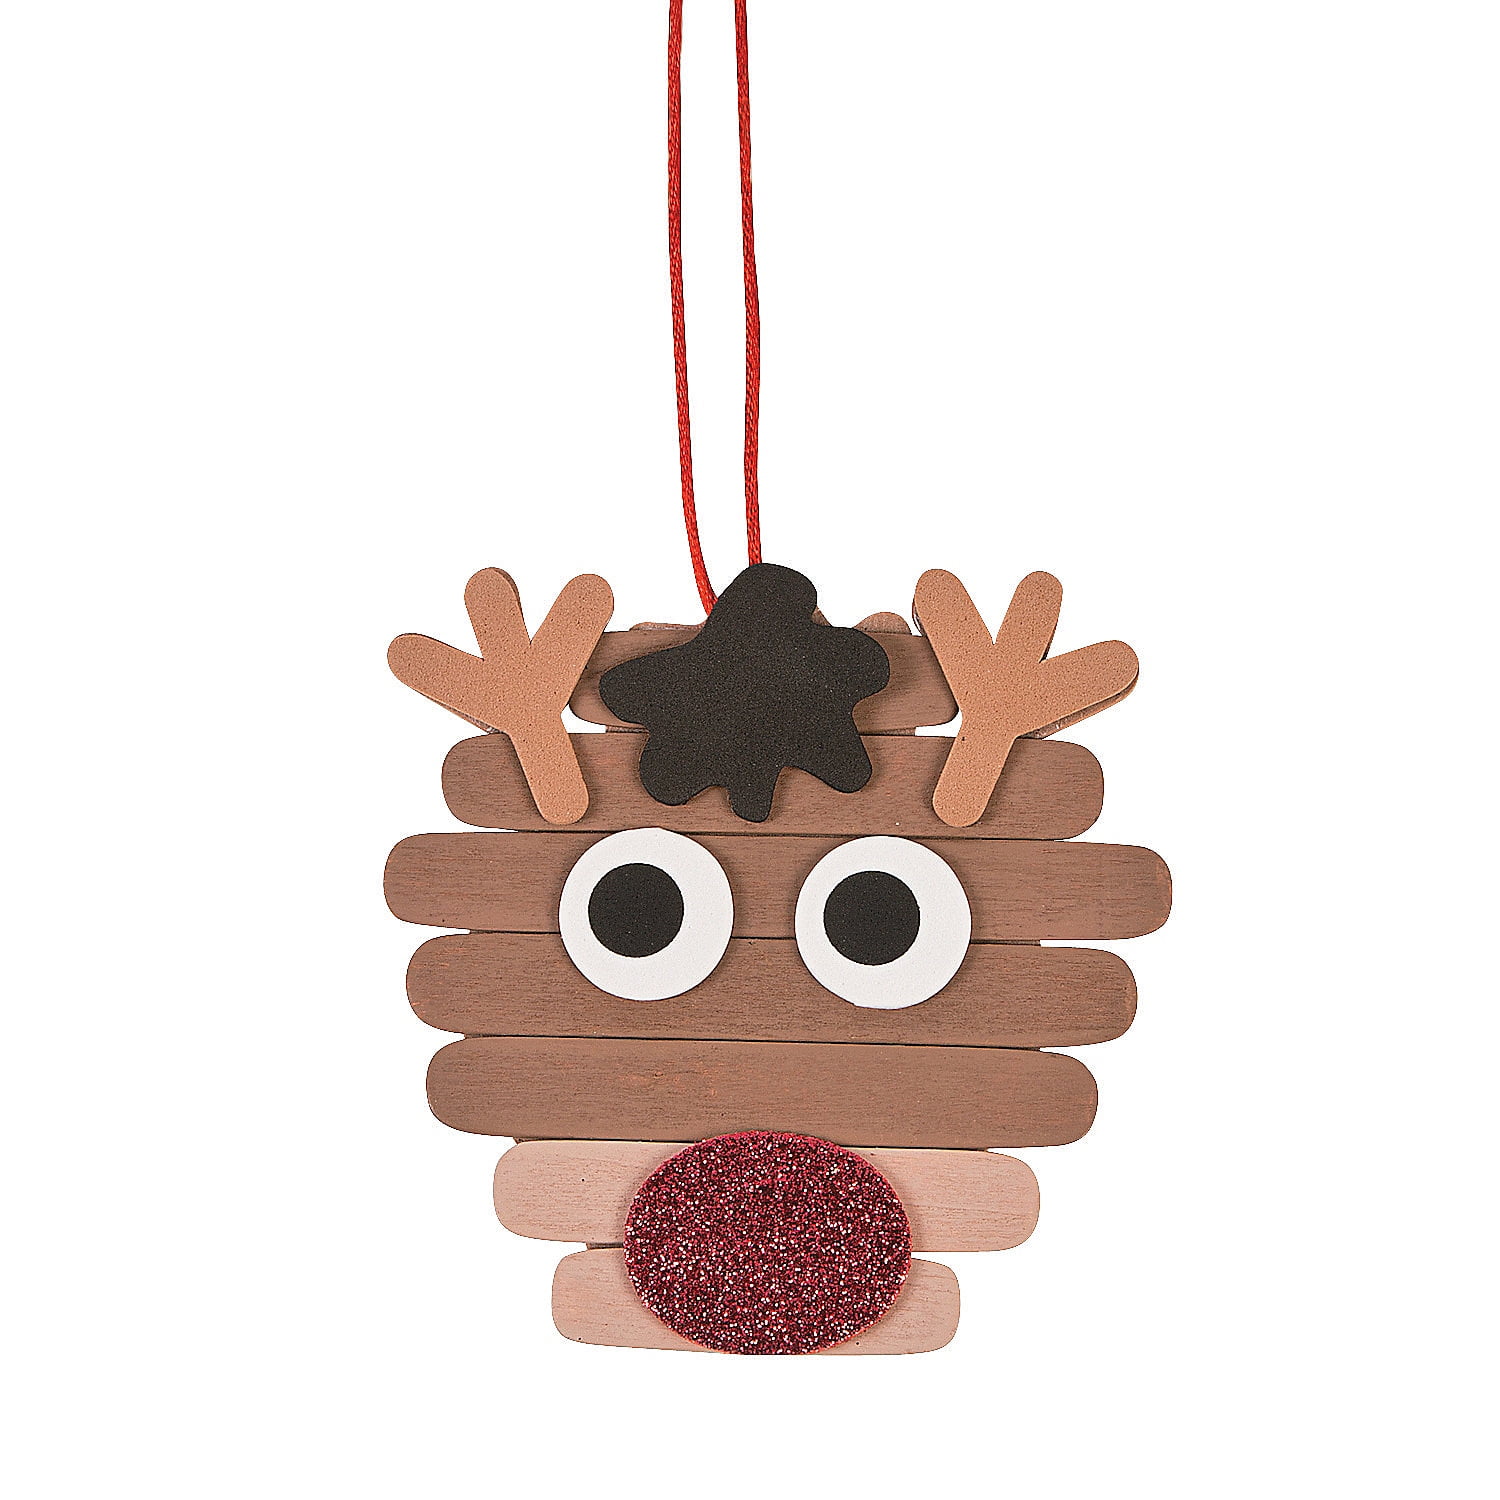  Kids Arts and Crafts Organizers and Storage Christmas Ornament  PlushToy Retro Deer Christmas Ornament Milu Deer DIY Crafts for Girls Ages  8-12 (A, One Size) : Home & Kitchen